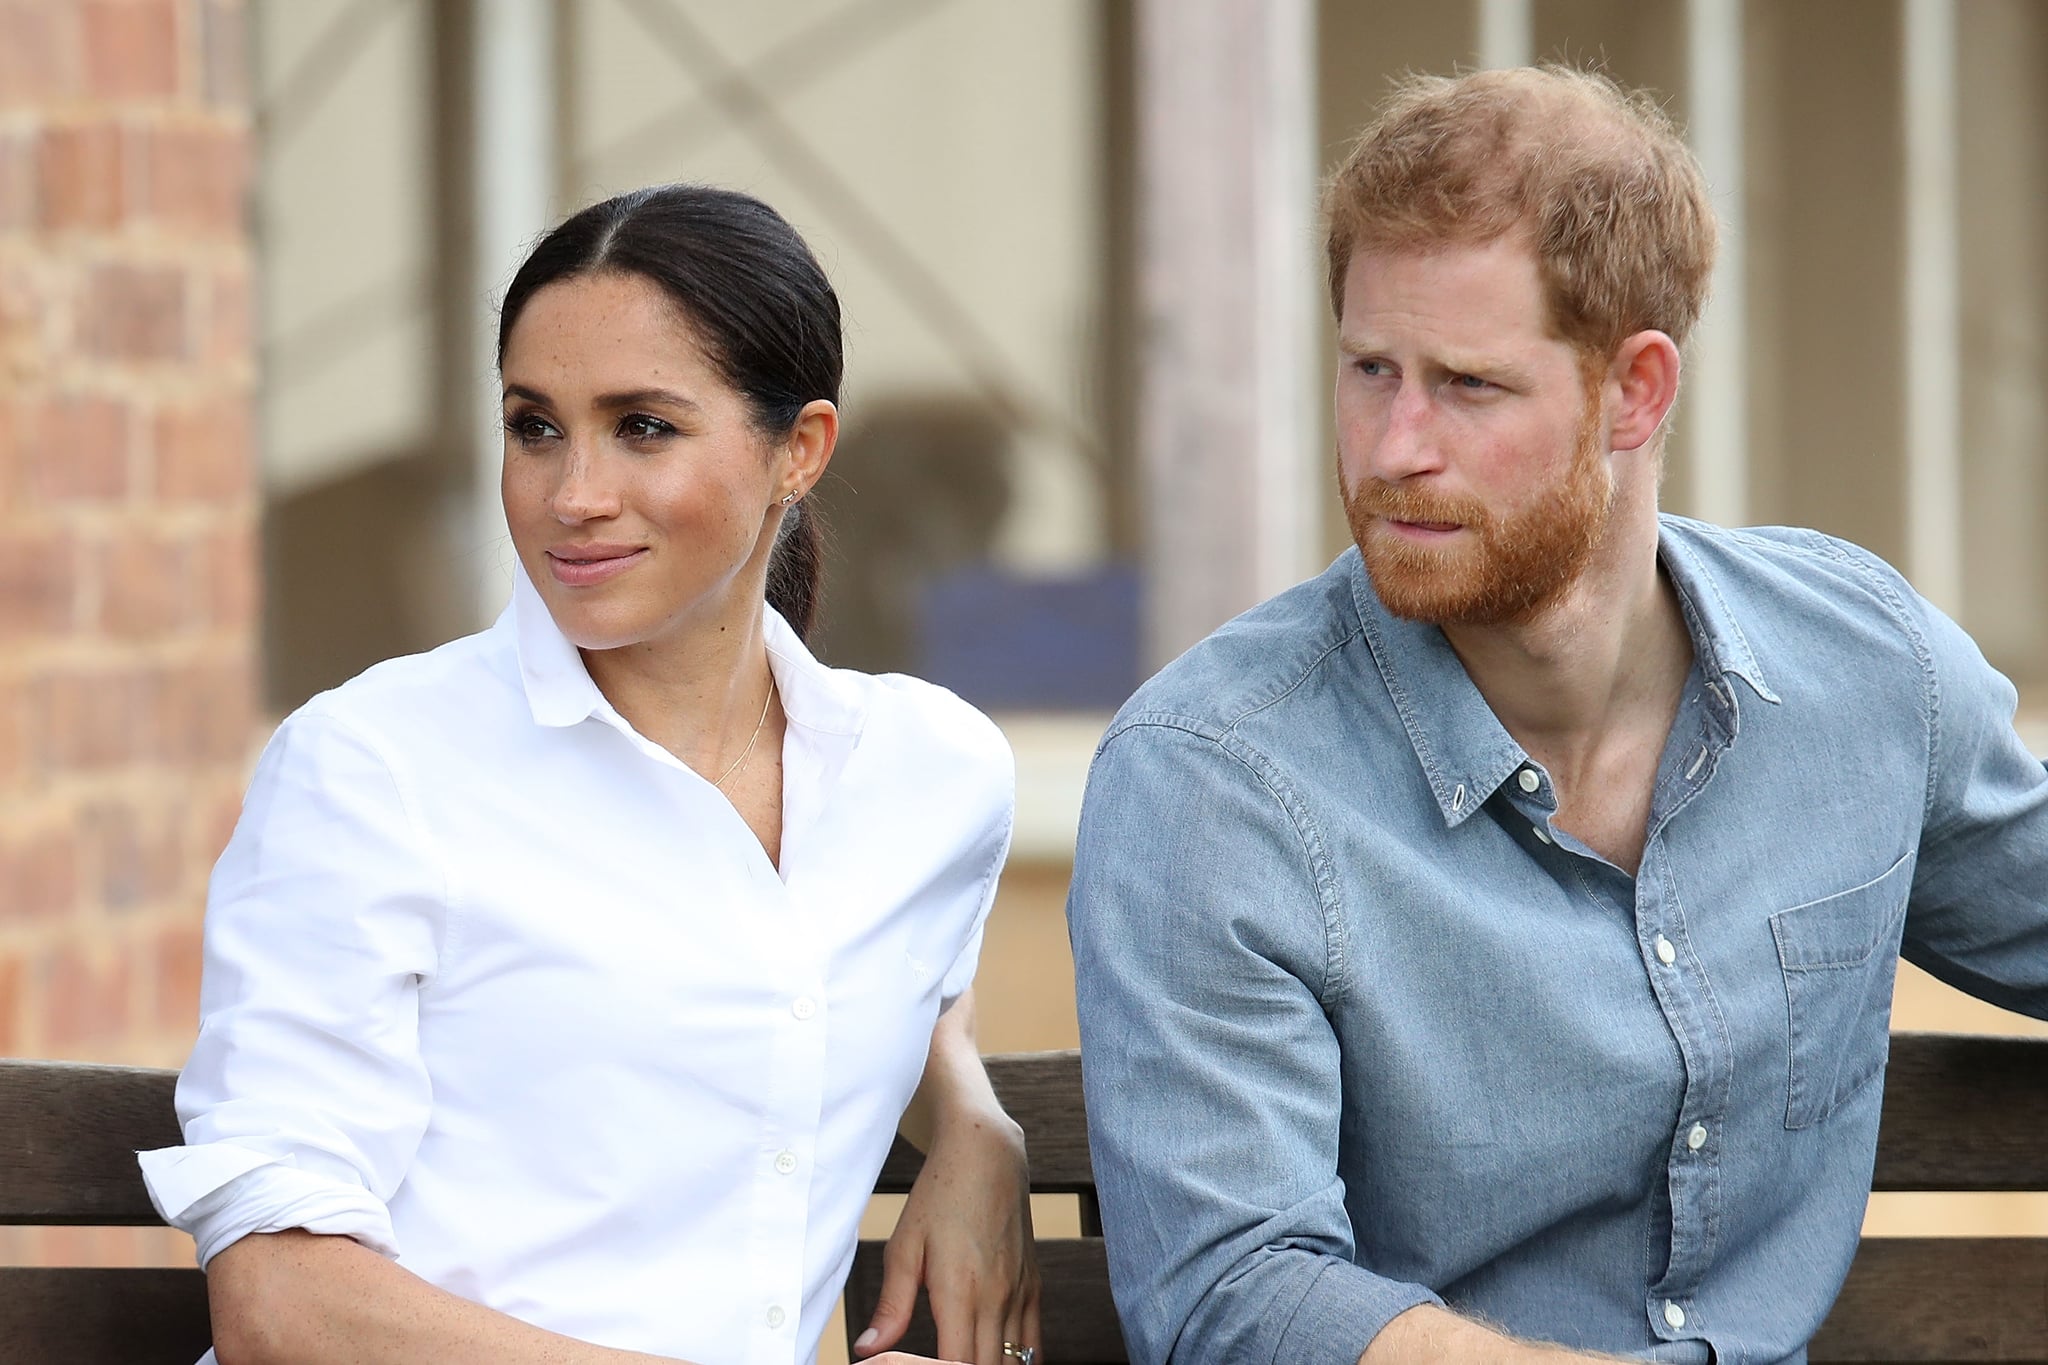 DUBBO, AUSTRALIA - OCTOBER 17:  Prince Harry, Duke of Sussex and Meghan, Duchess of Sussex visit a local farming family, the Woodleys, on October 17, 2018 in Dubbo, Australia. The Duke and Duchess of Sussex are on their official 16-day Autumn tour visiting cities in Australia, Fiji, Tonga and New Zealand.  (Photo by Chris Jackson - Pool/Getty Images)